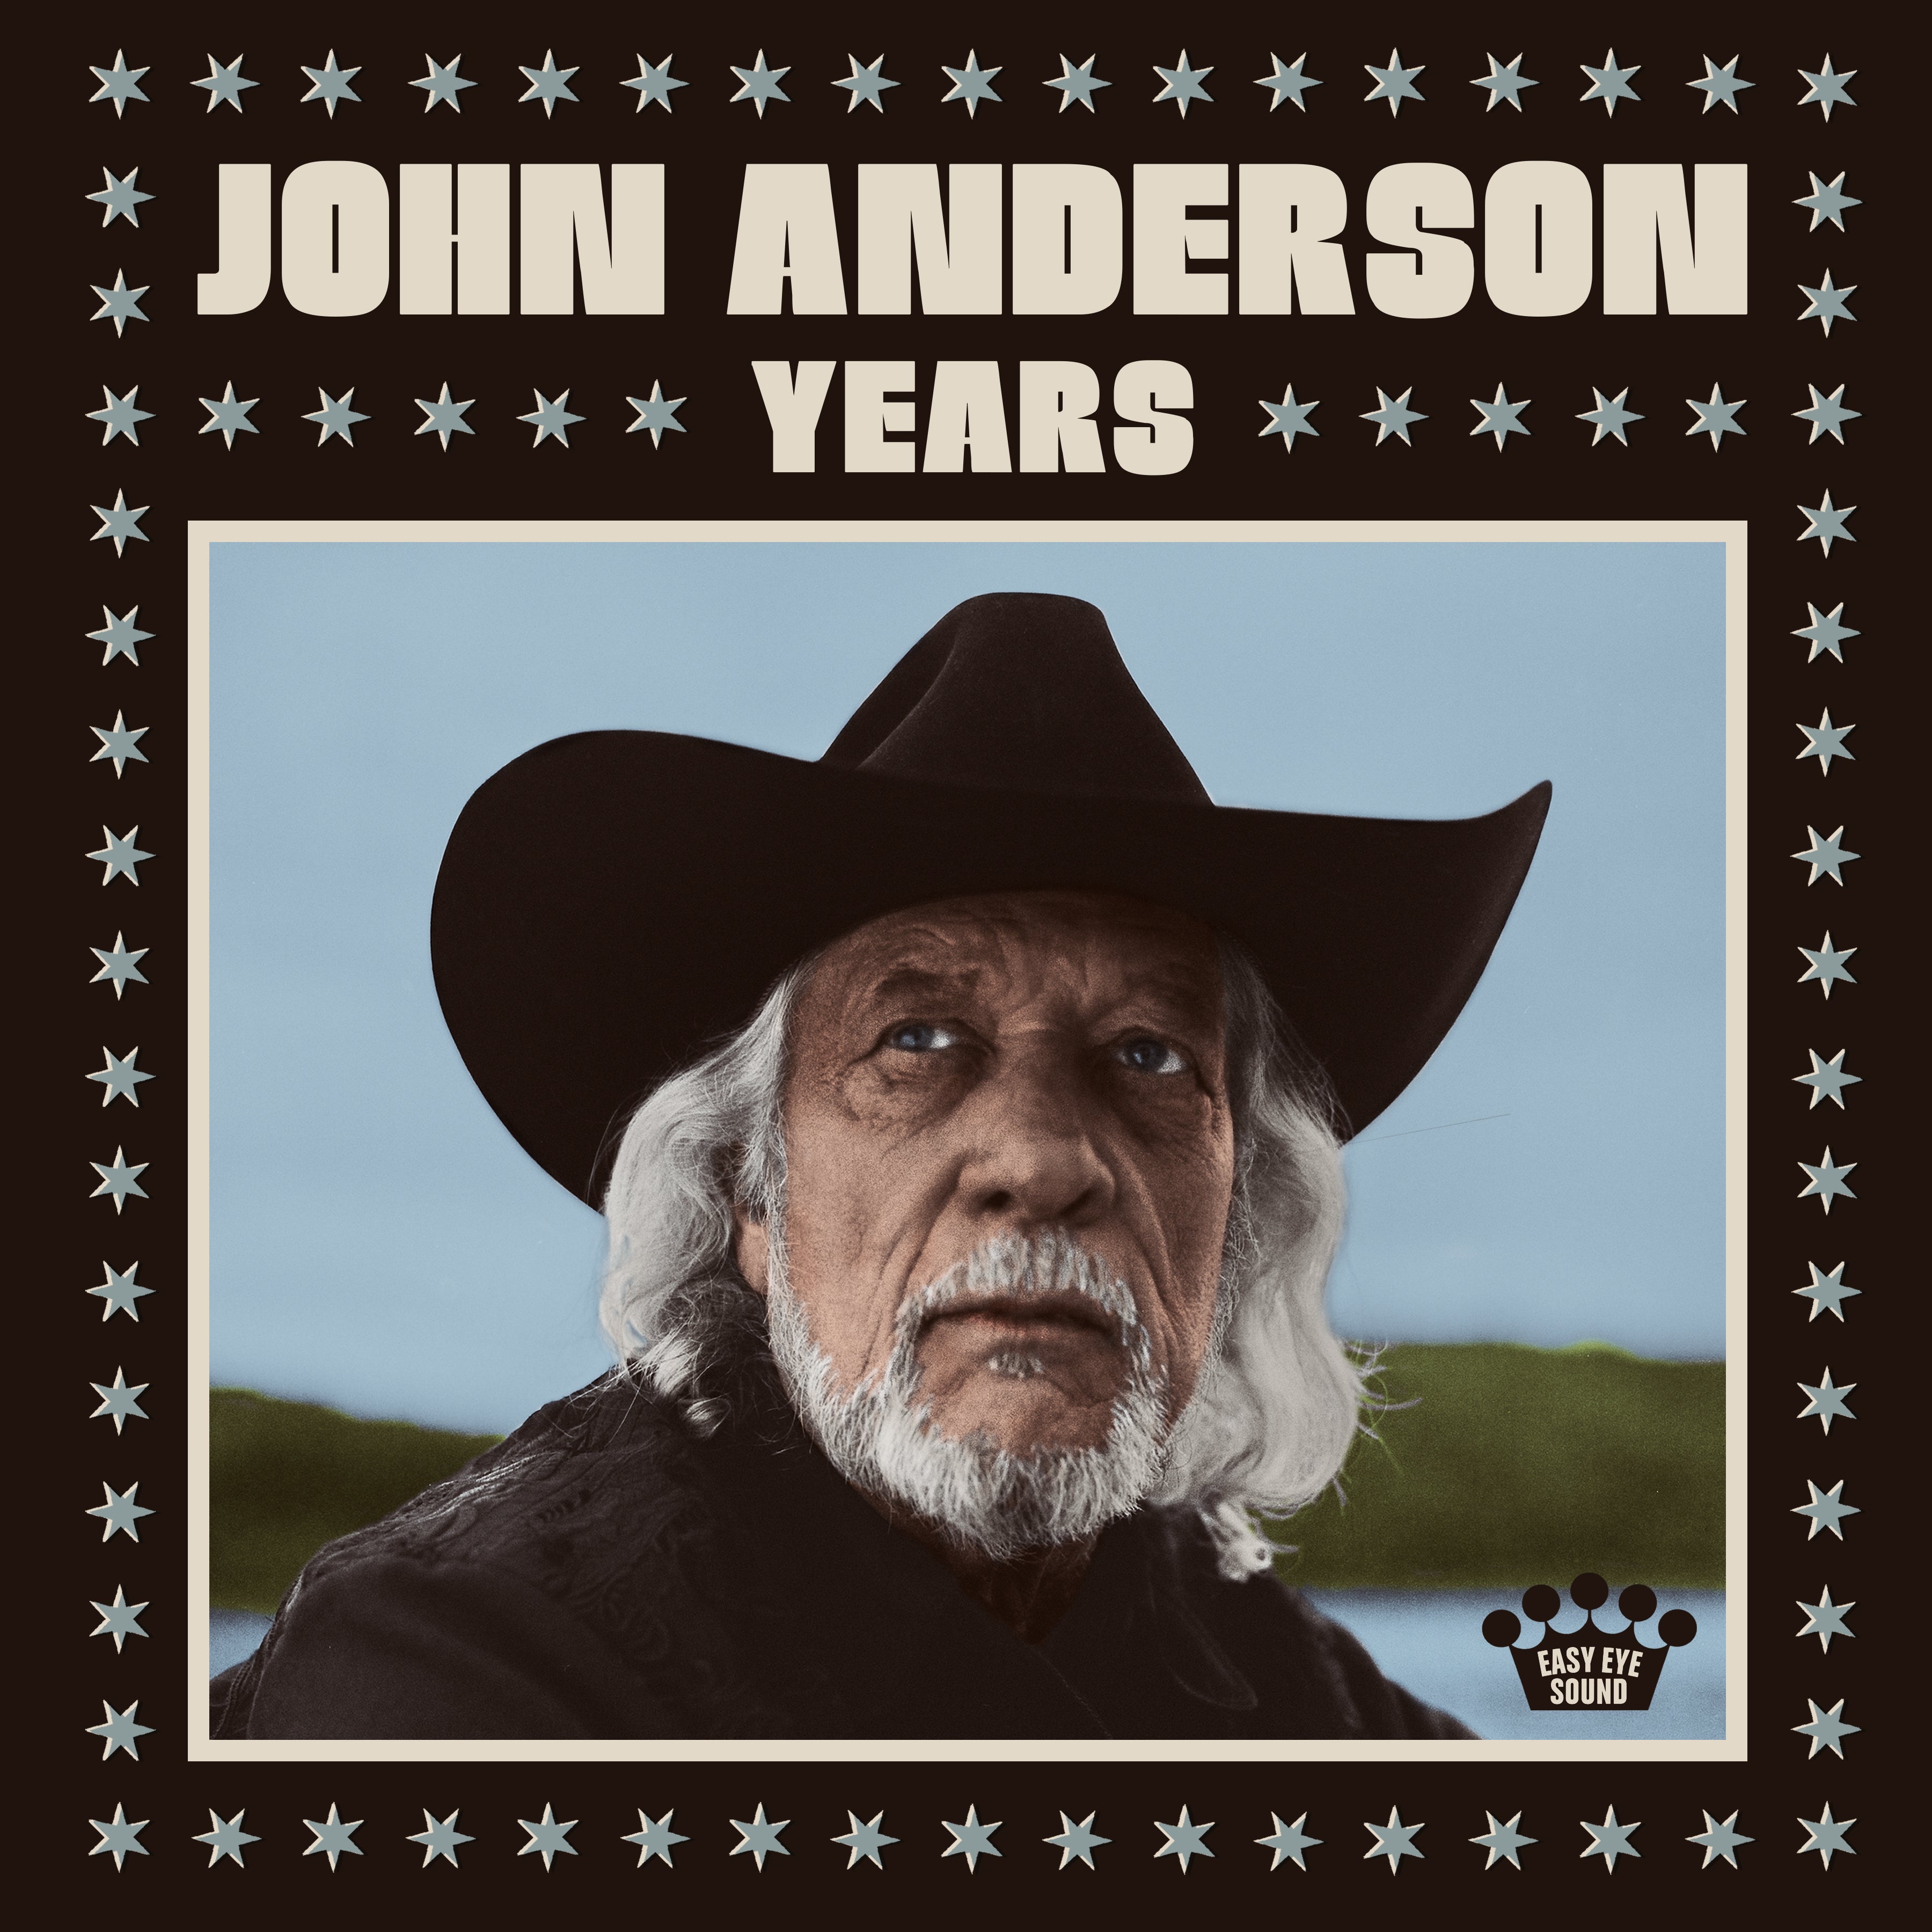 NEW JOHN ANDERSON ALBUM “YEARS”, “I’M STILL HANGIN’ ON” VIDEO NOW AVAILABLE!